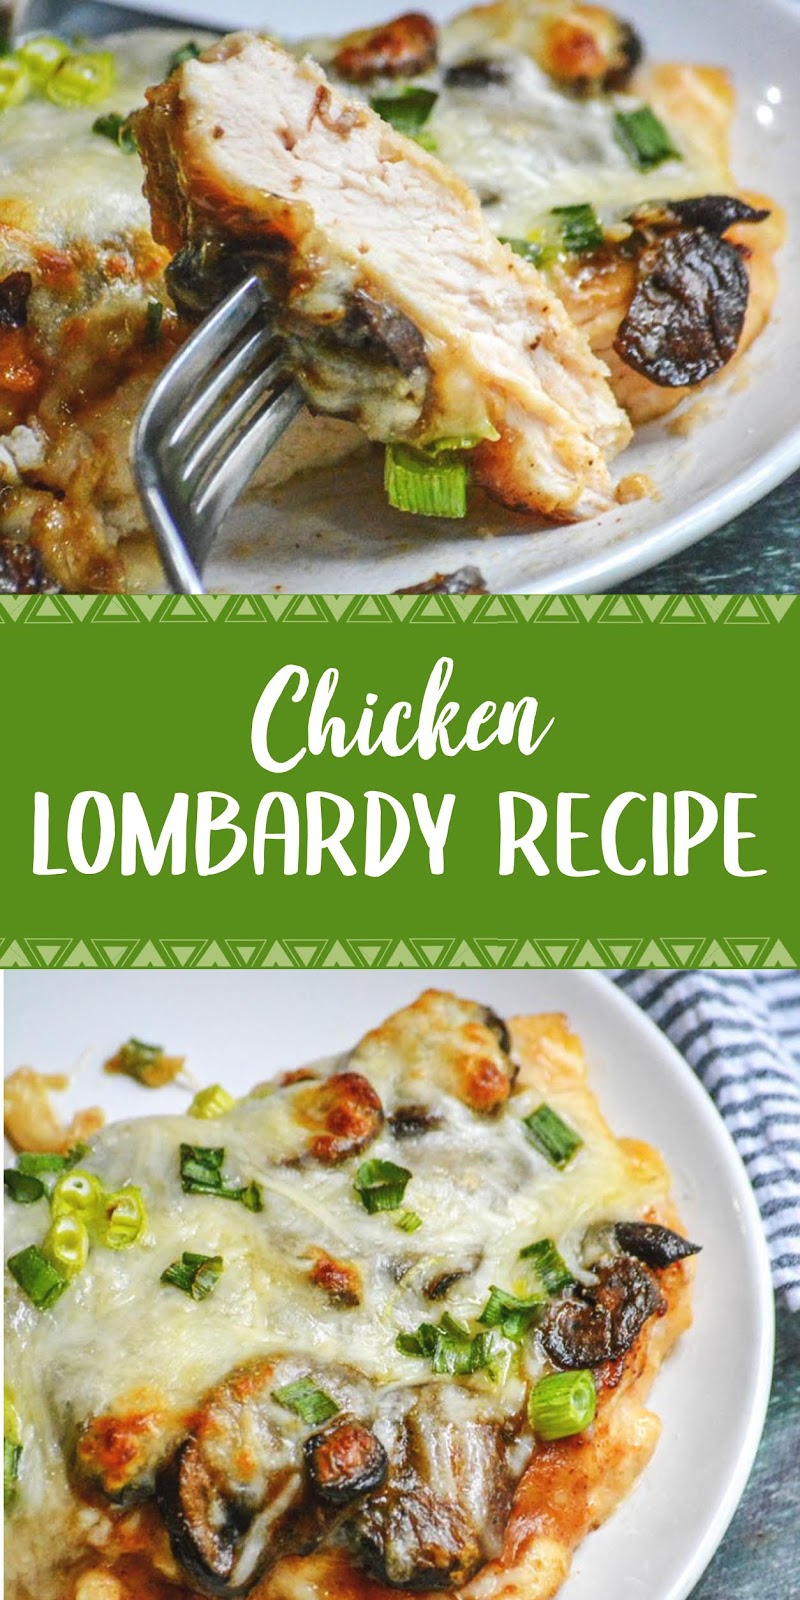 CHICKEN LOMBARDY RECIPE - Cindy Glover